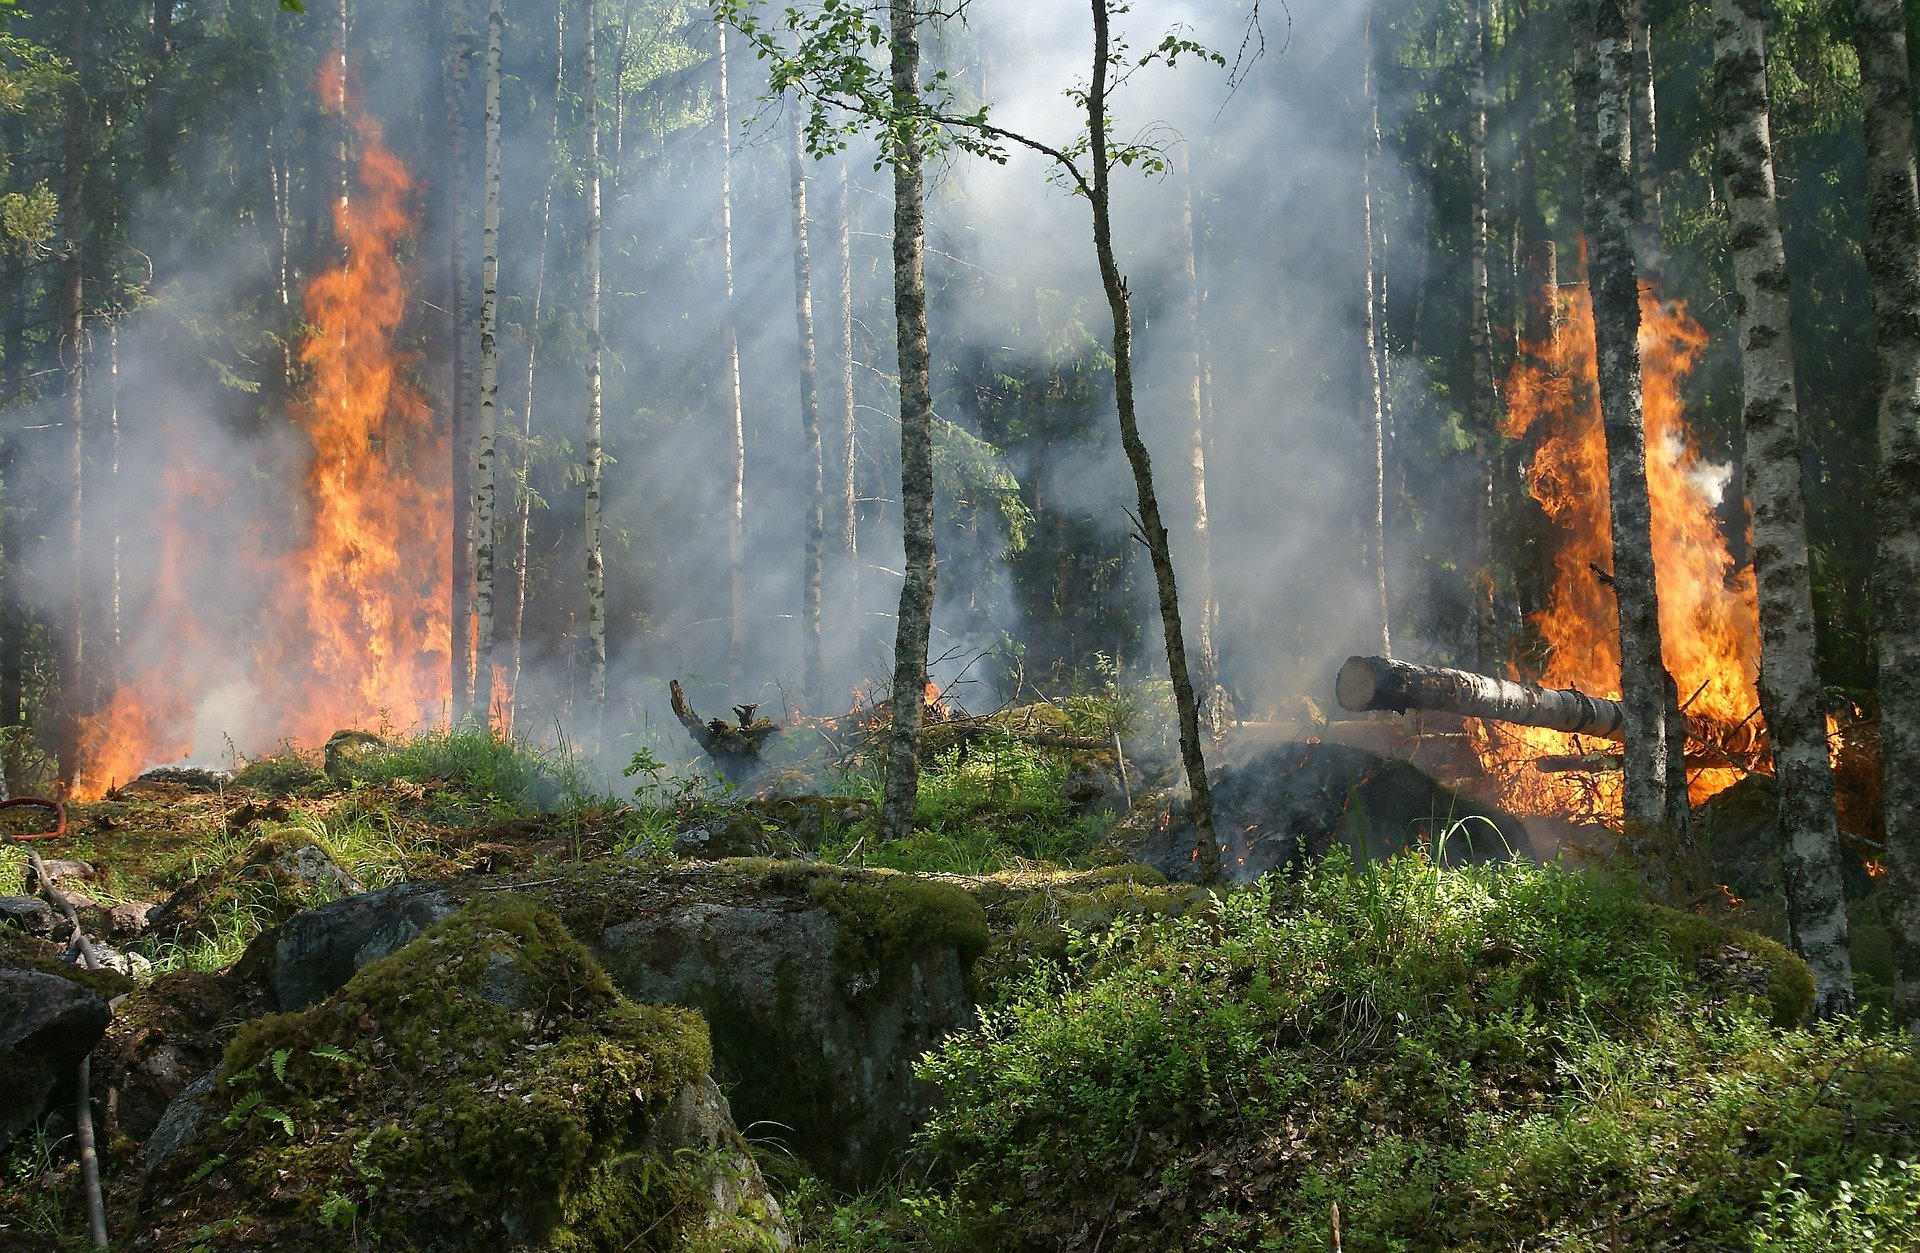 forest-fire-g5699f97bc_1920.jpg